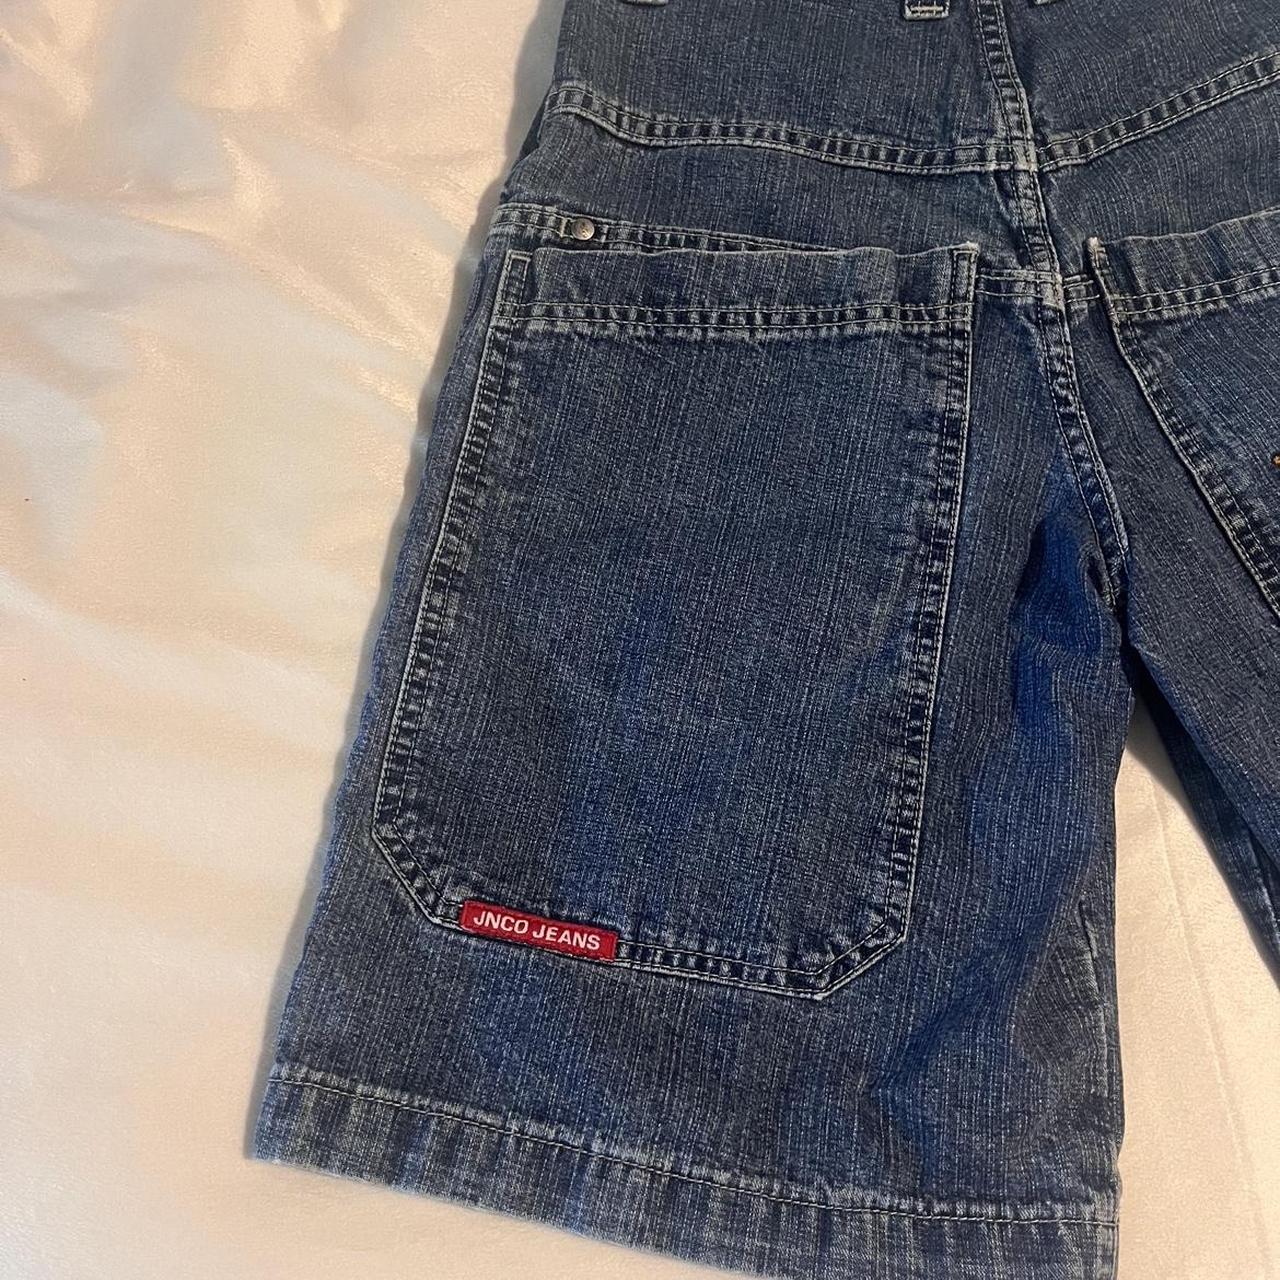 JNCO jorts sick print on the back Size 14 youth Msg... - Depop